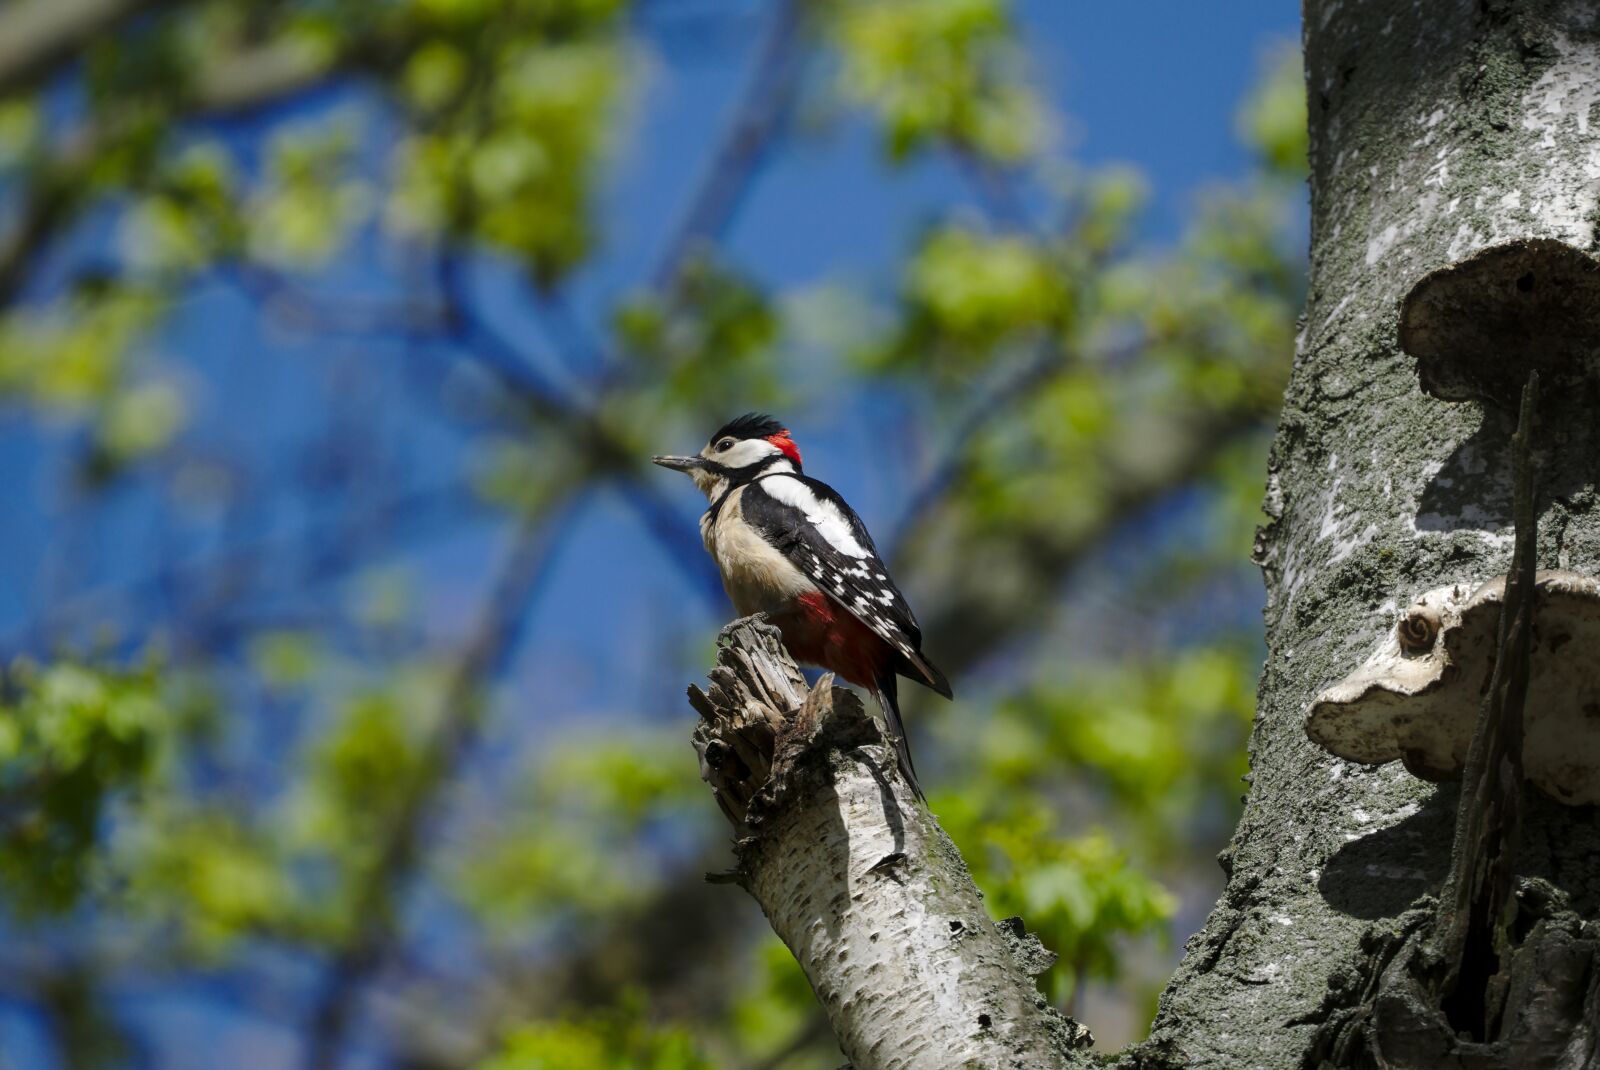 Sony a6000 + Sony FE 70-300mm F4.5-5.6 G OSS sample photo. Great spotted woodpecker, great photography